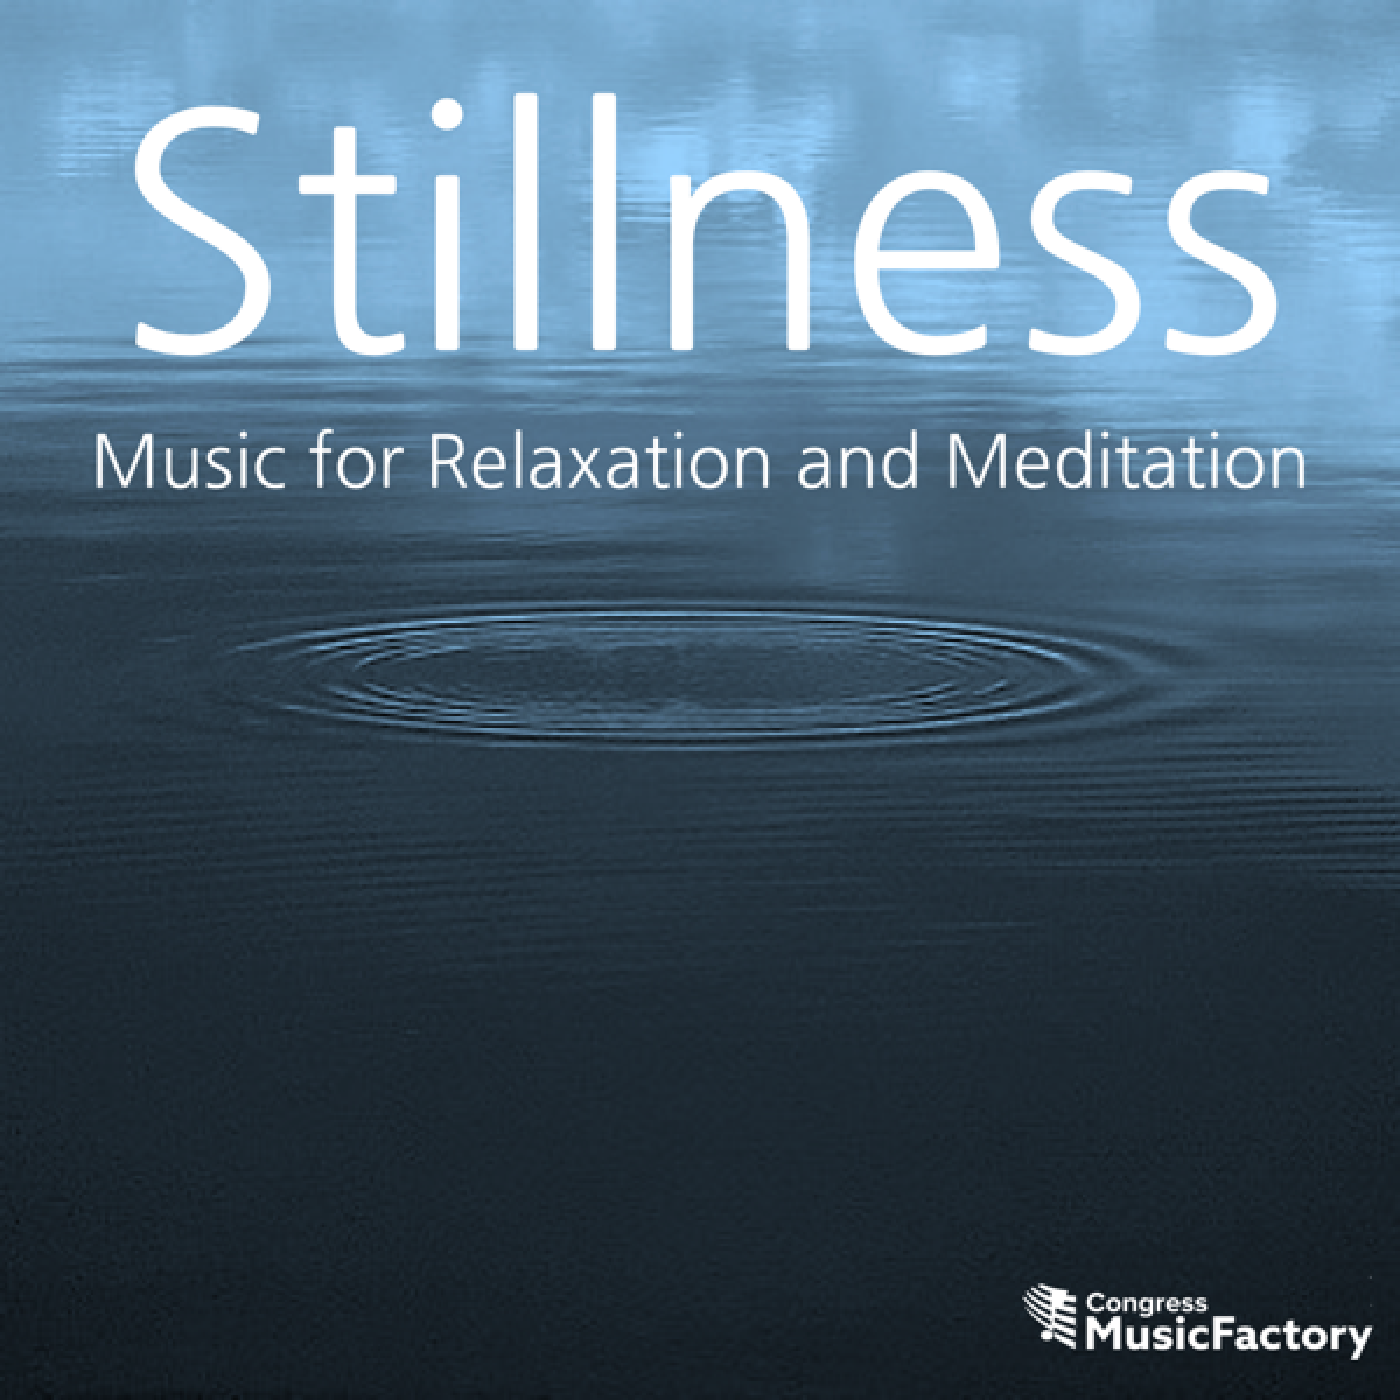 Stillness - Music for Relaxation and Meditation